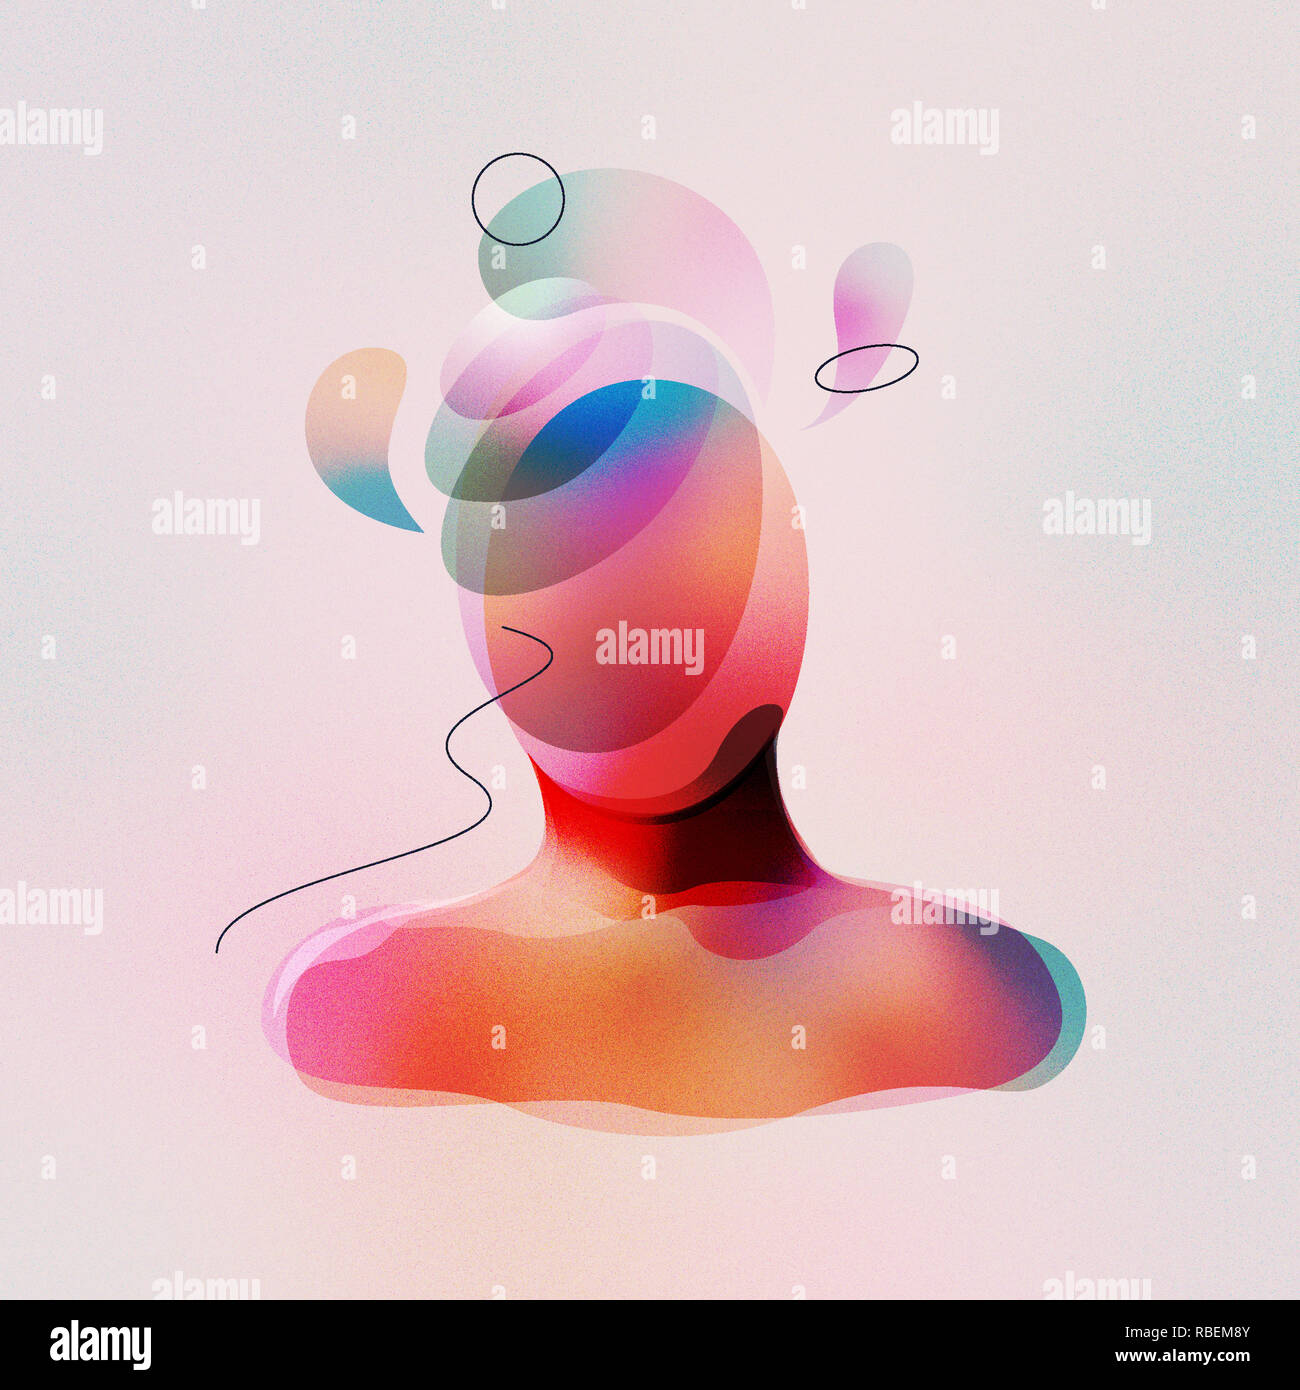 Digital illustration of a surrealistic faceless human with spiritual thoughts. Made with vector vbrant color gradient geometry forms. Stock Photo